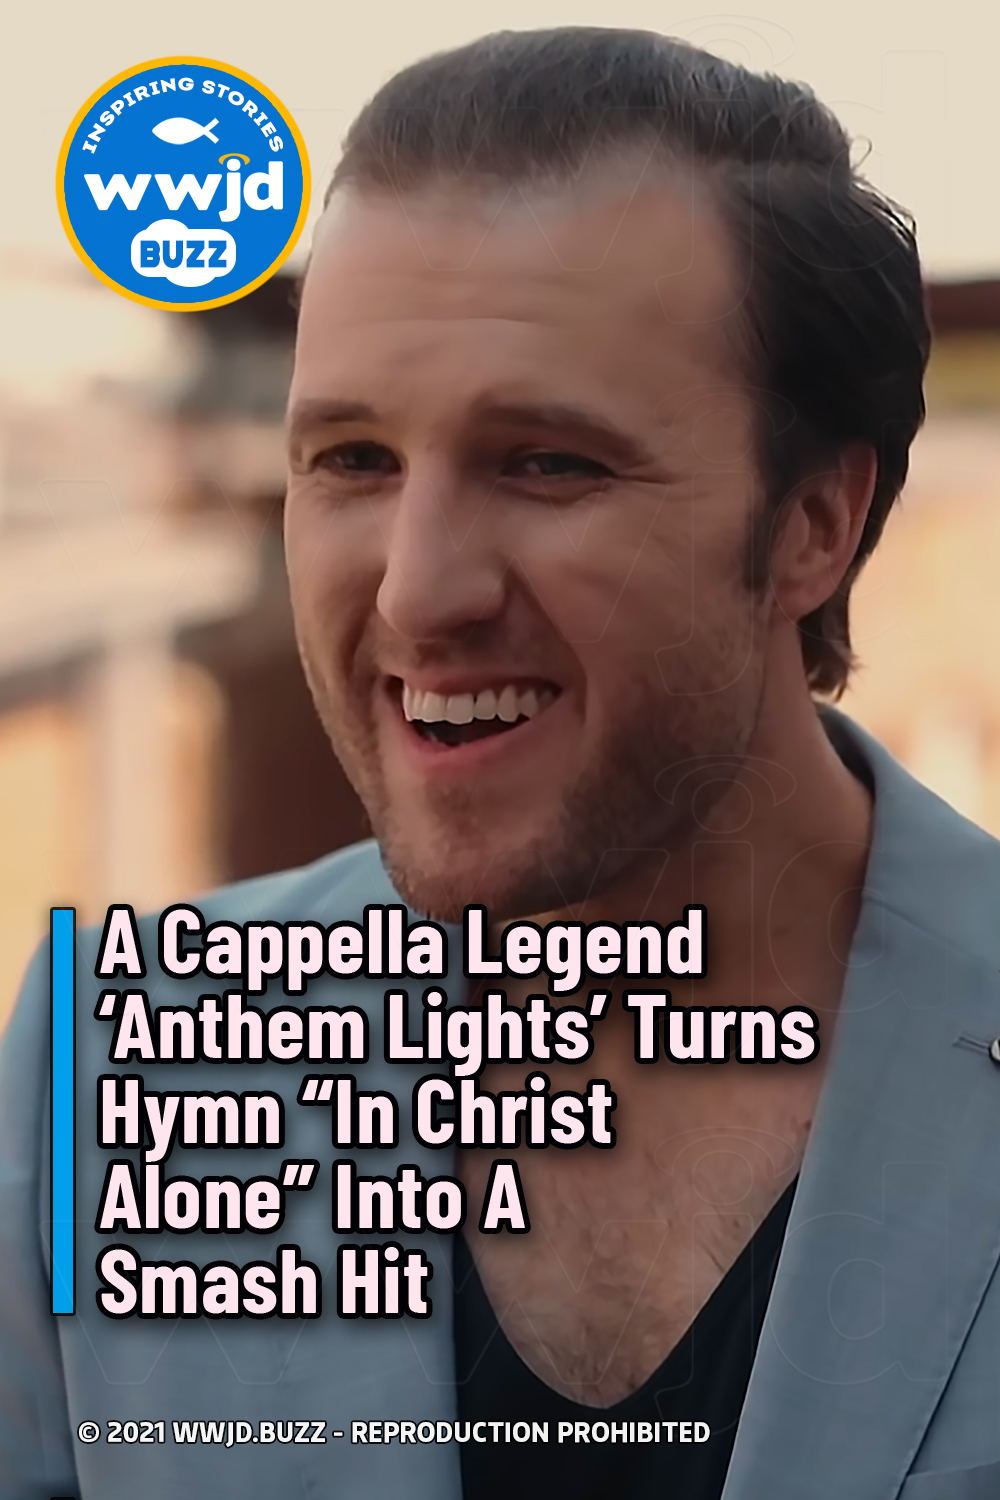 A Cappella Legend ‘Anthem Lights’ Turns Hymn “In Christ Alone” Into A Smash Hit